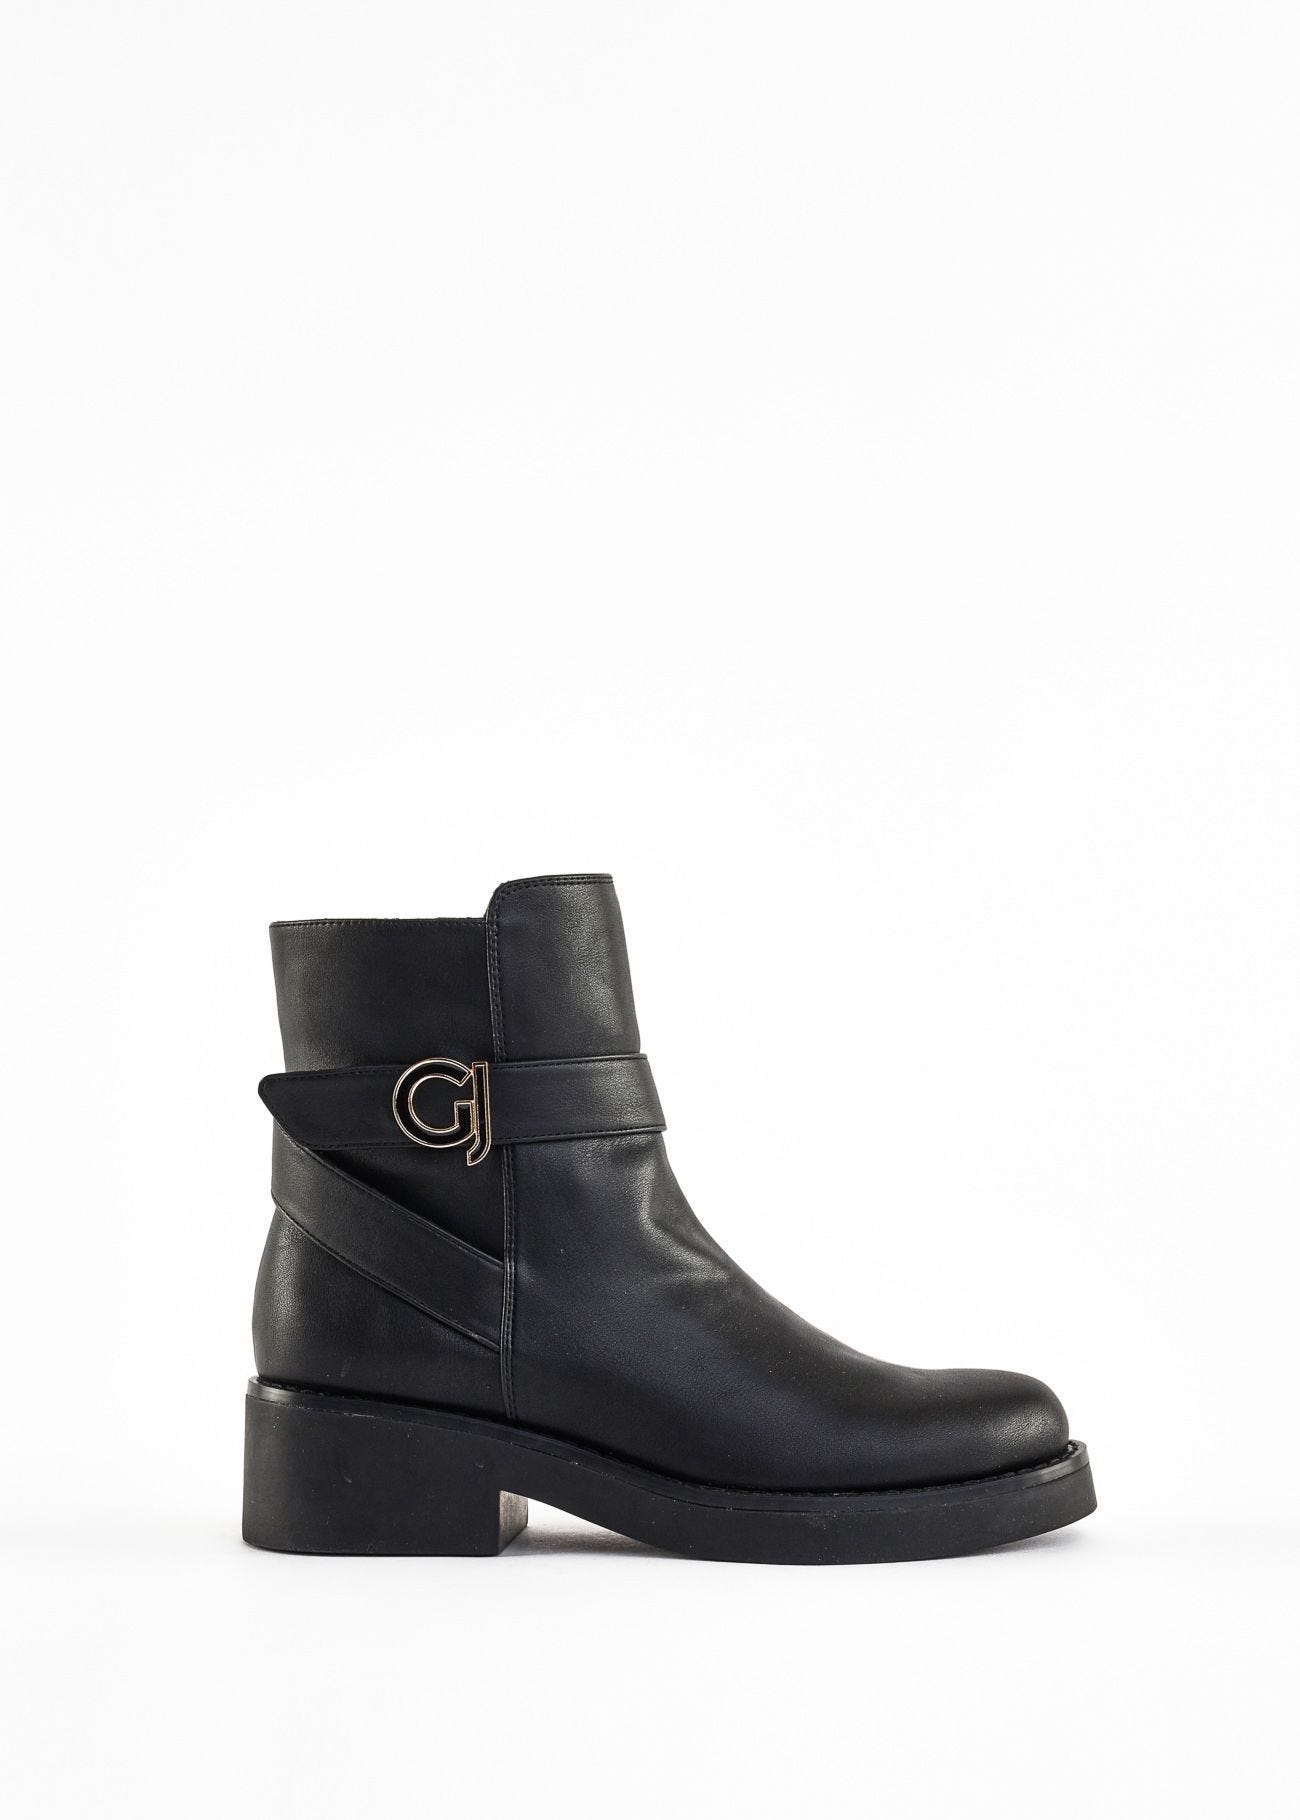 Biker ankle boots with logo